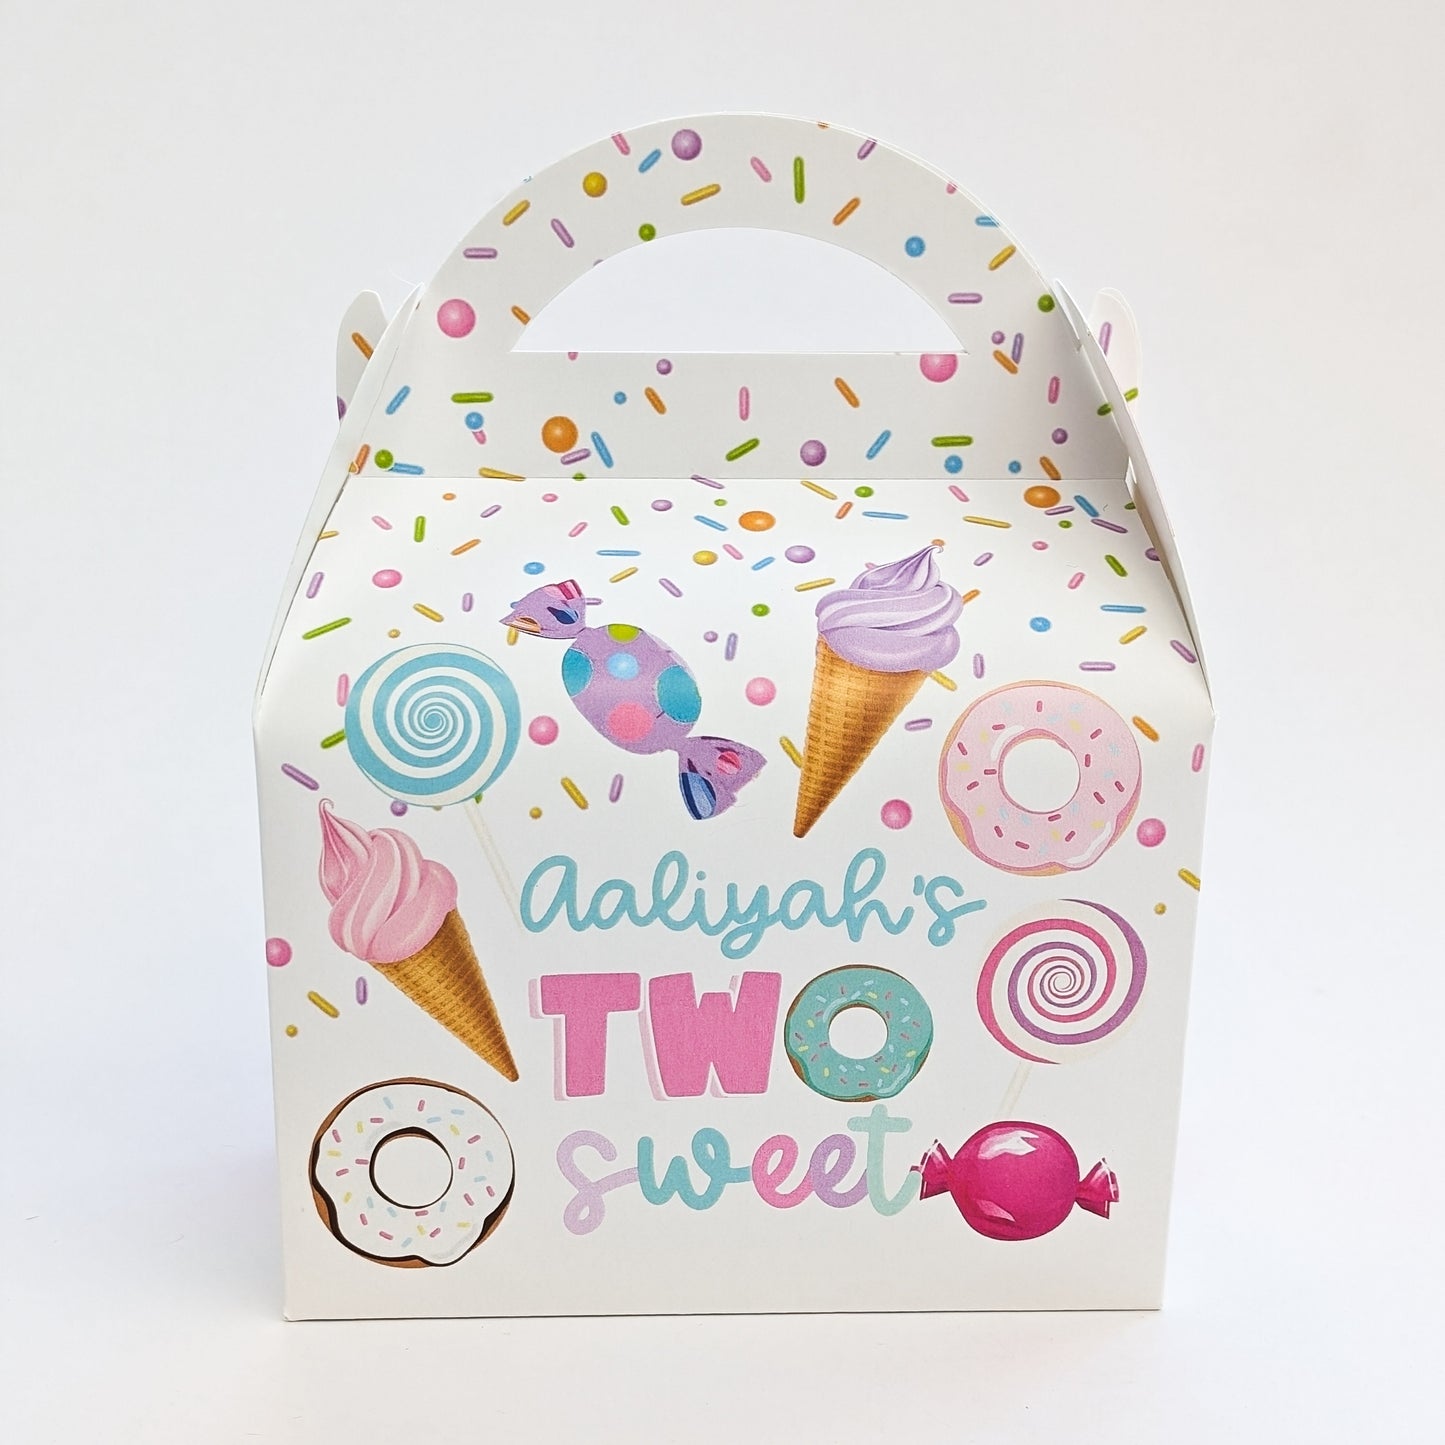 Candyland Two Sweet Birthday Party Treat Boxes Gift Bags